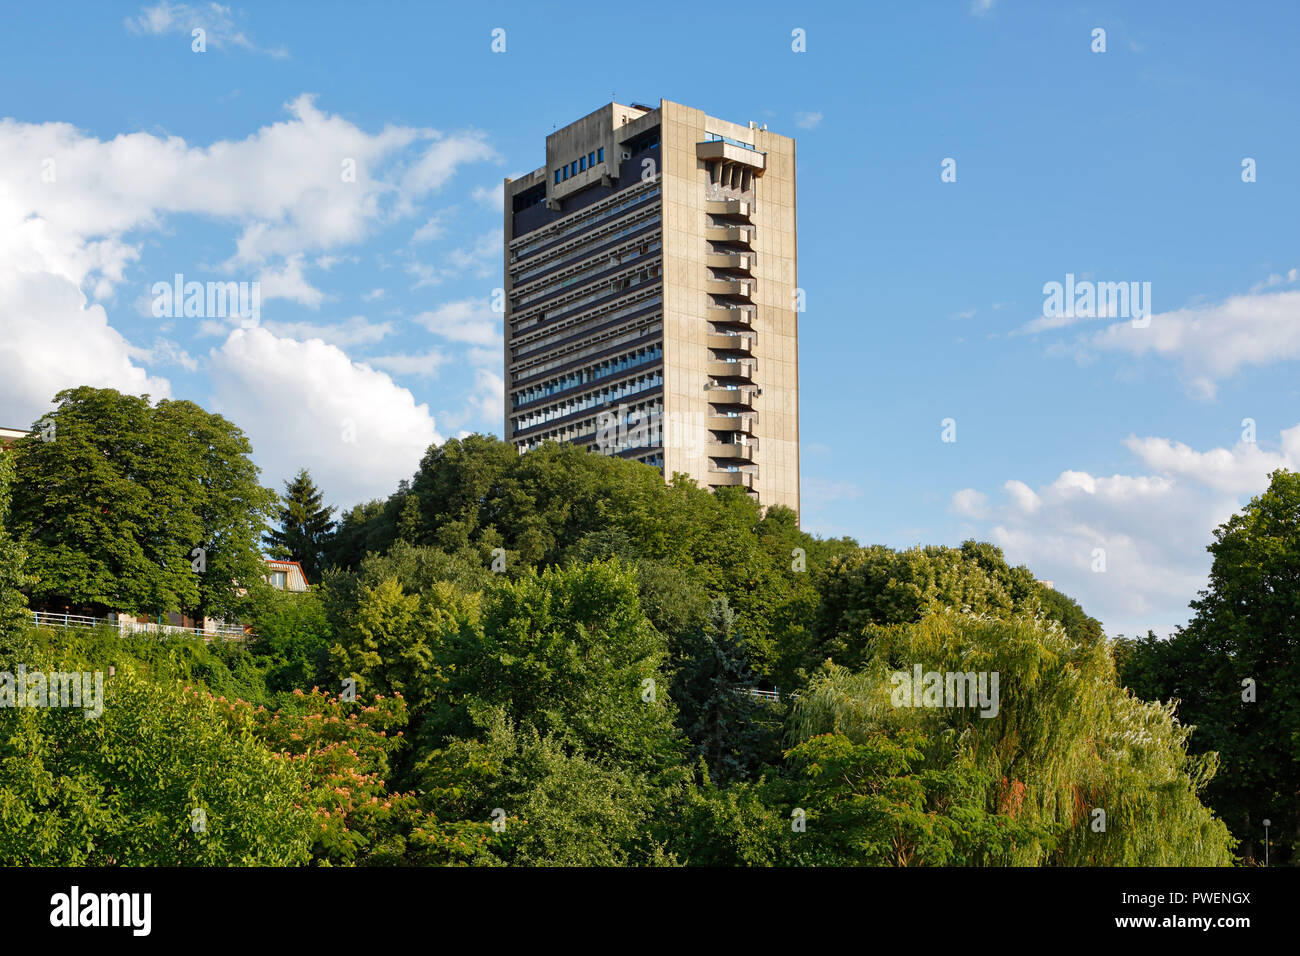 Bulgaria, Northern Bulgaria, Ruse at the Danube, Rousse, Russe, Danube lowlands, Grand Hotel Riga, highrise, trees, cloudy sky Stock Photo